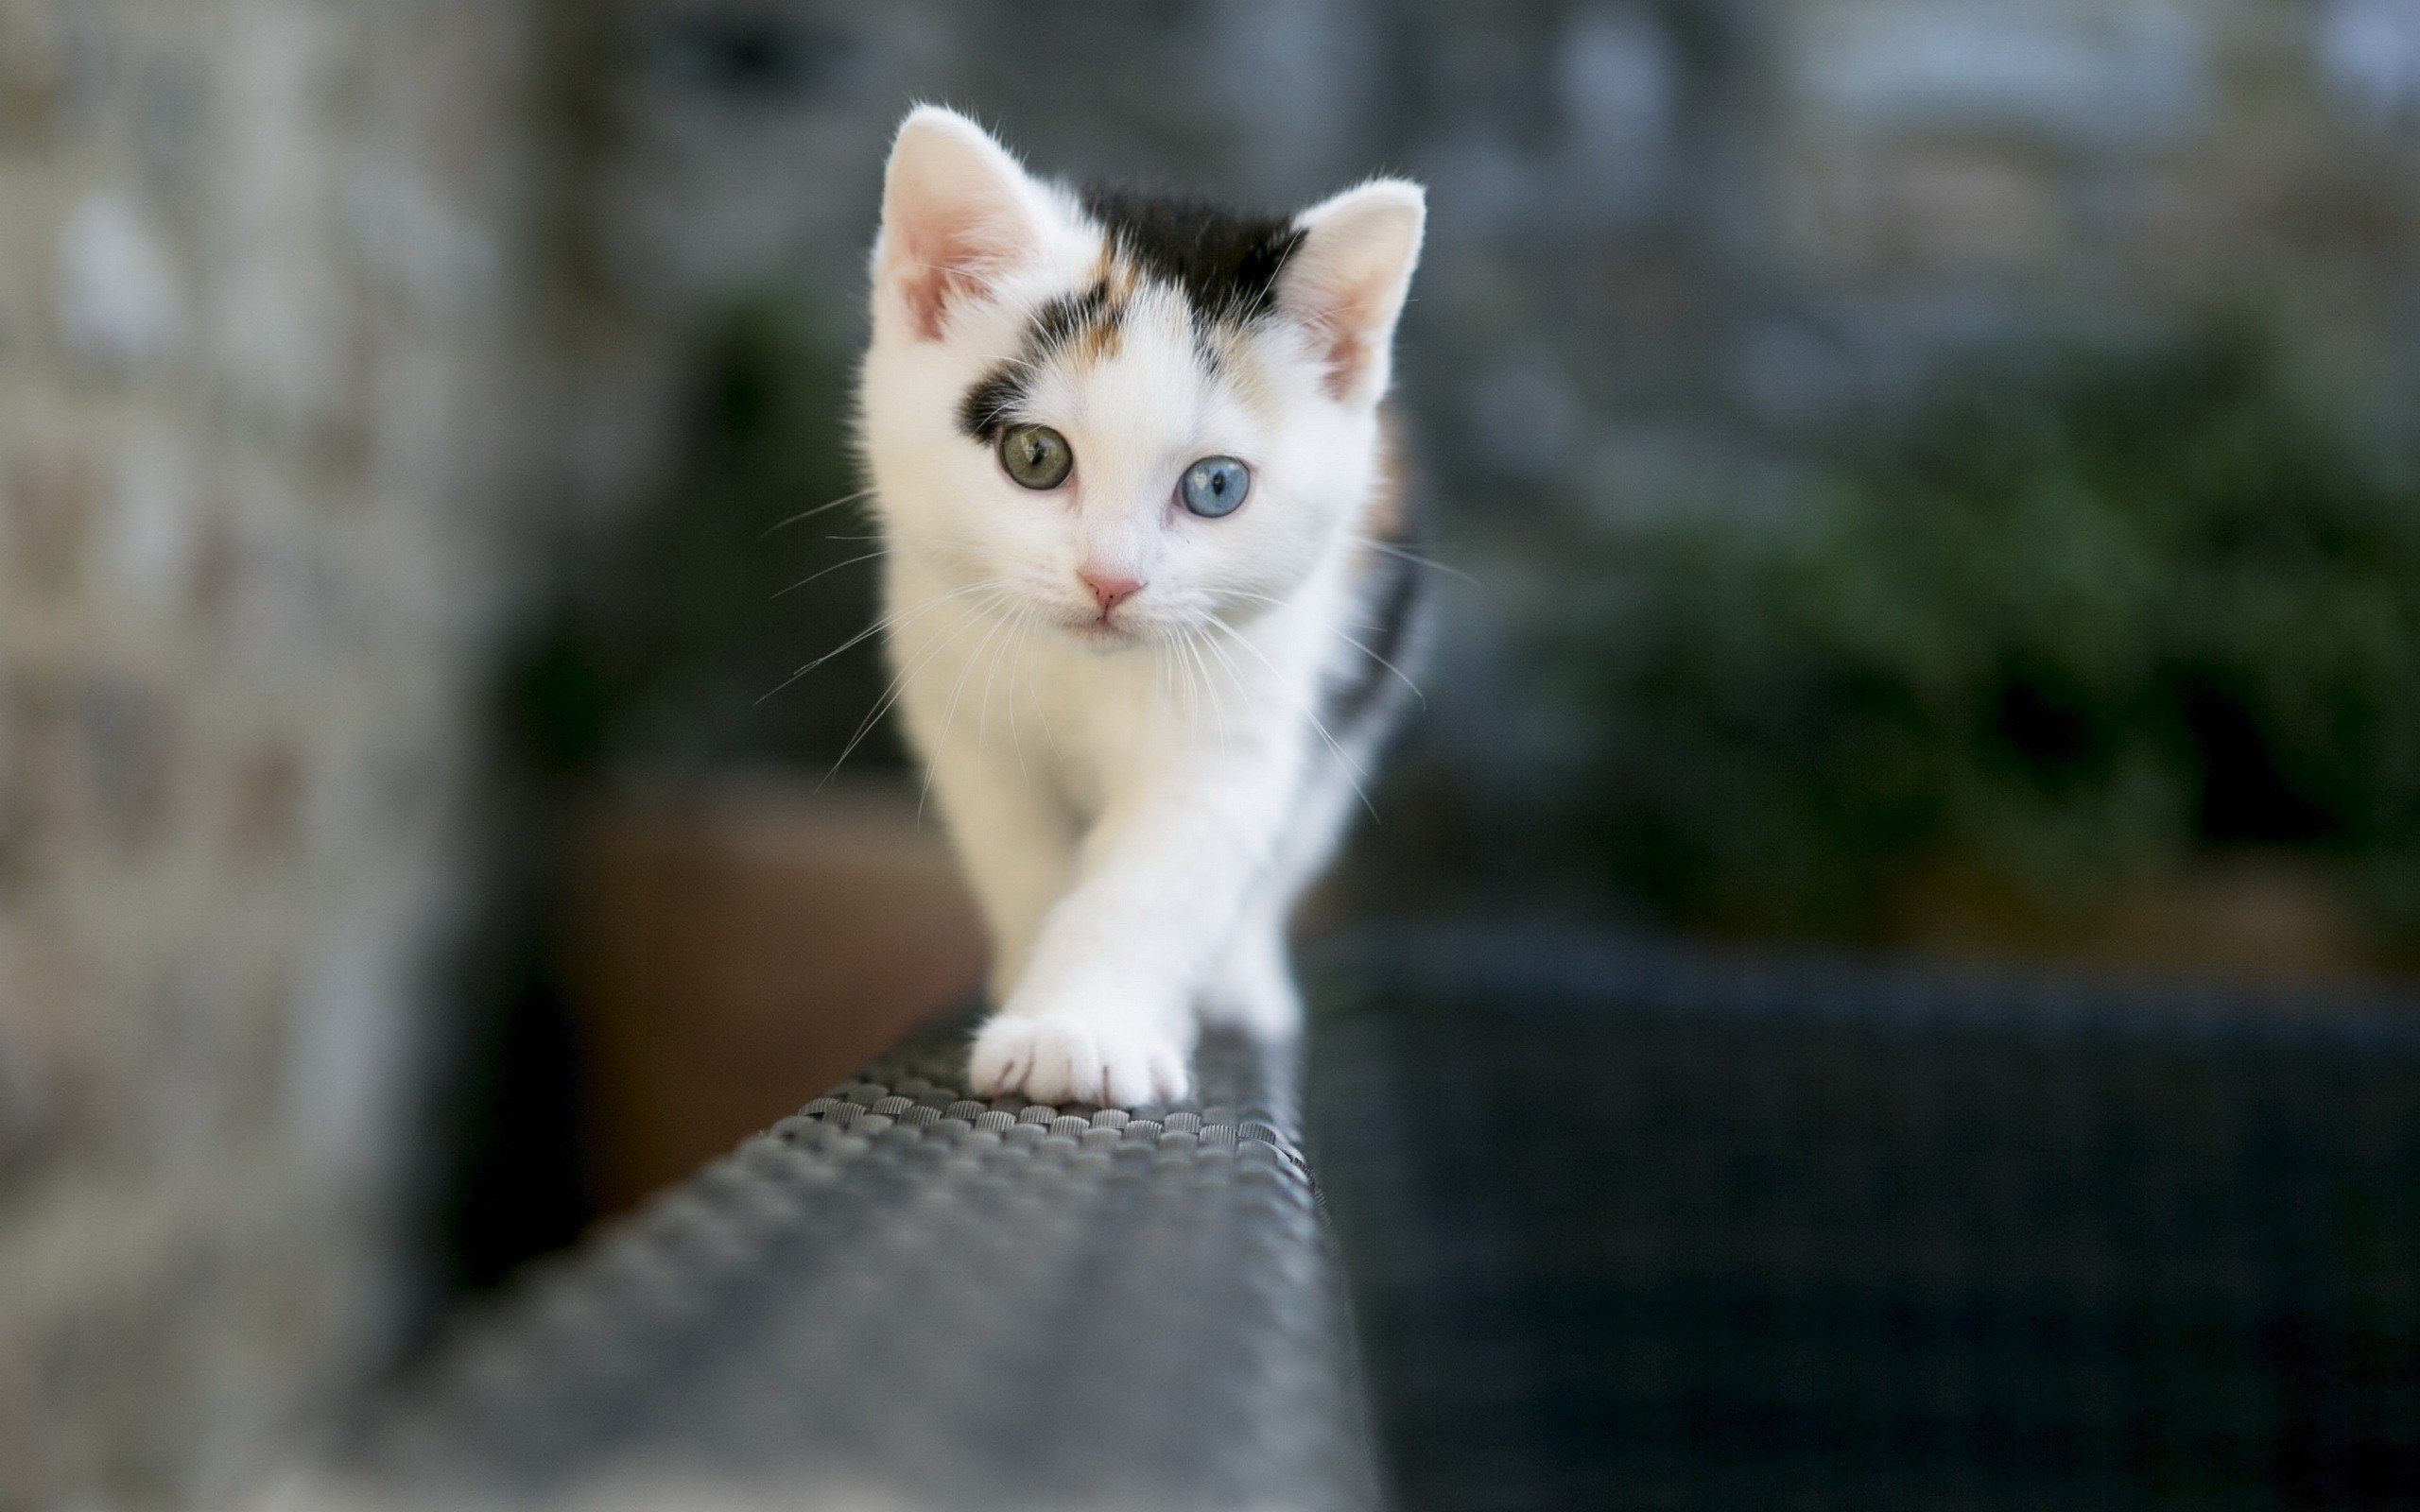 Cute Kittens With Different Colored Eyes - HD Wallpaper 